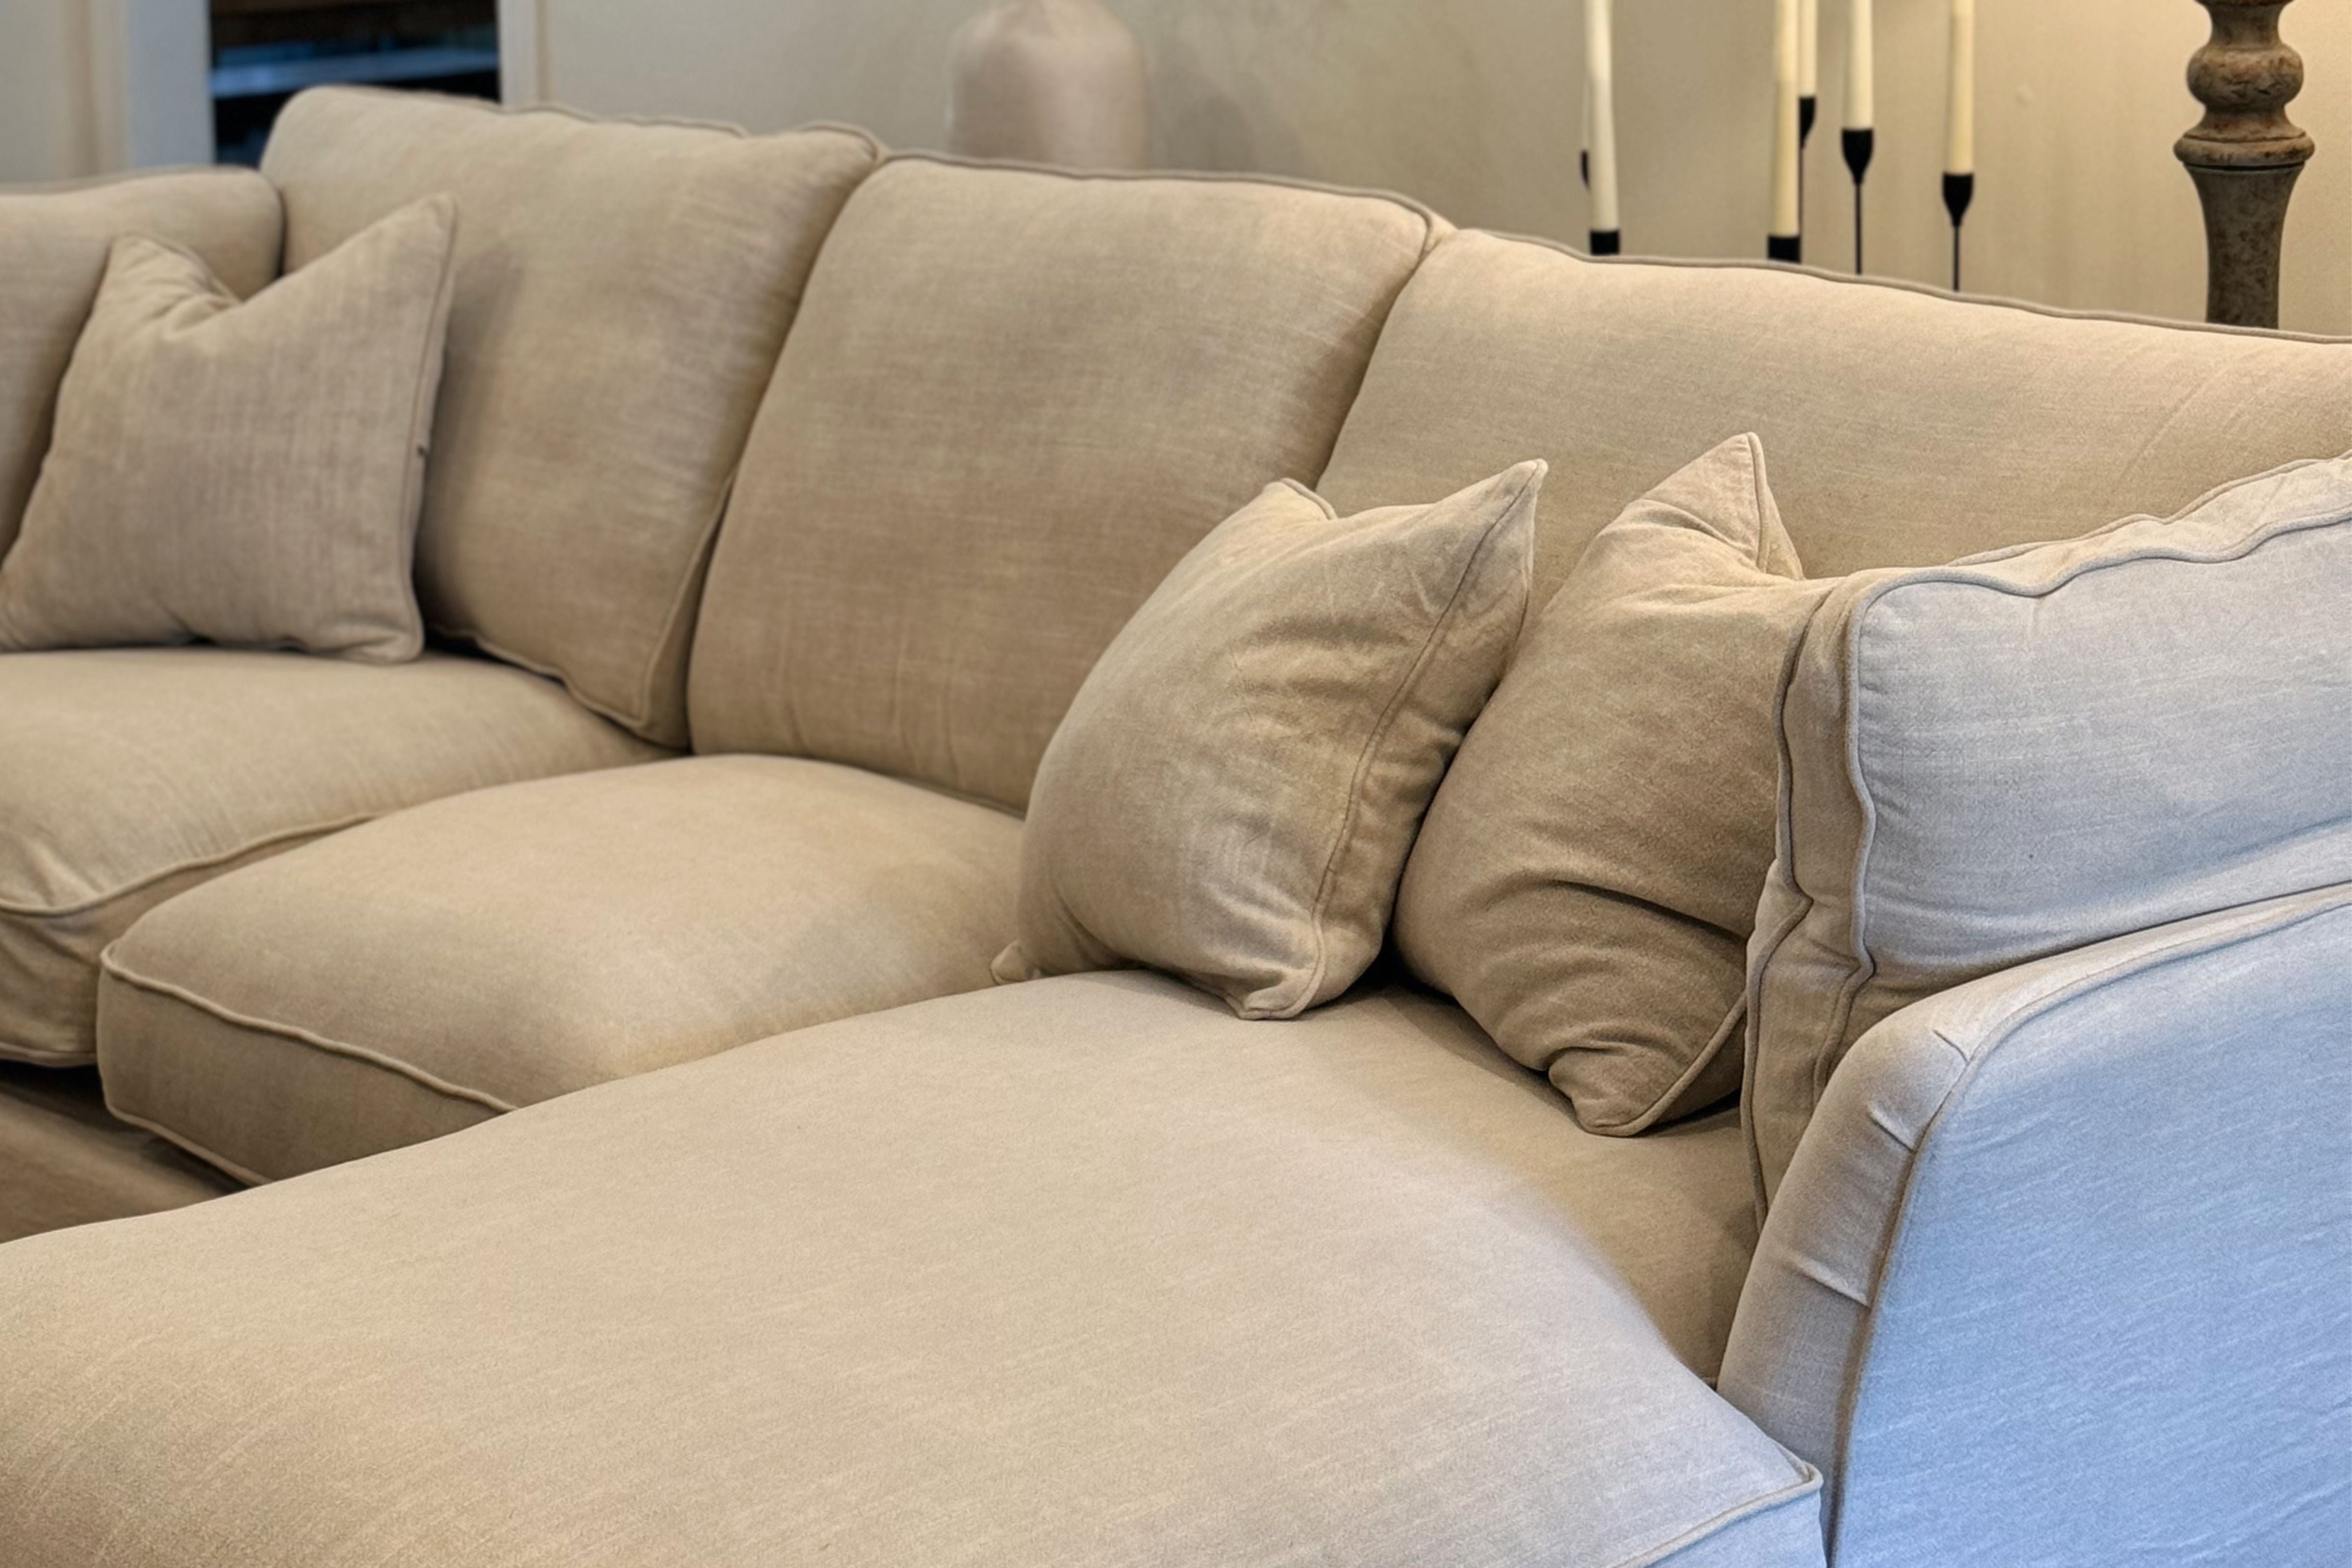 How to Arrange an L-Shaped Sofa in Your Living Room